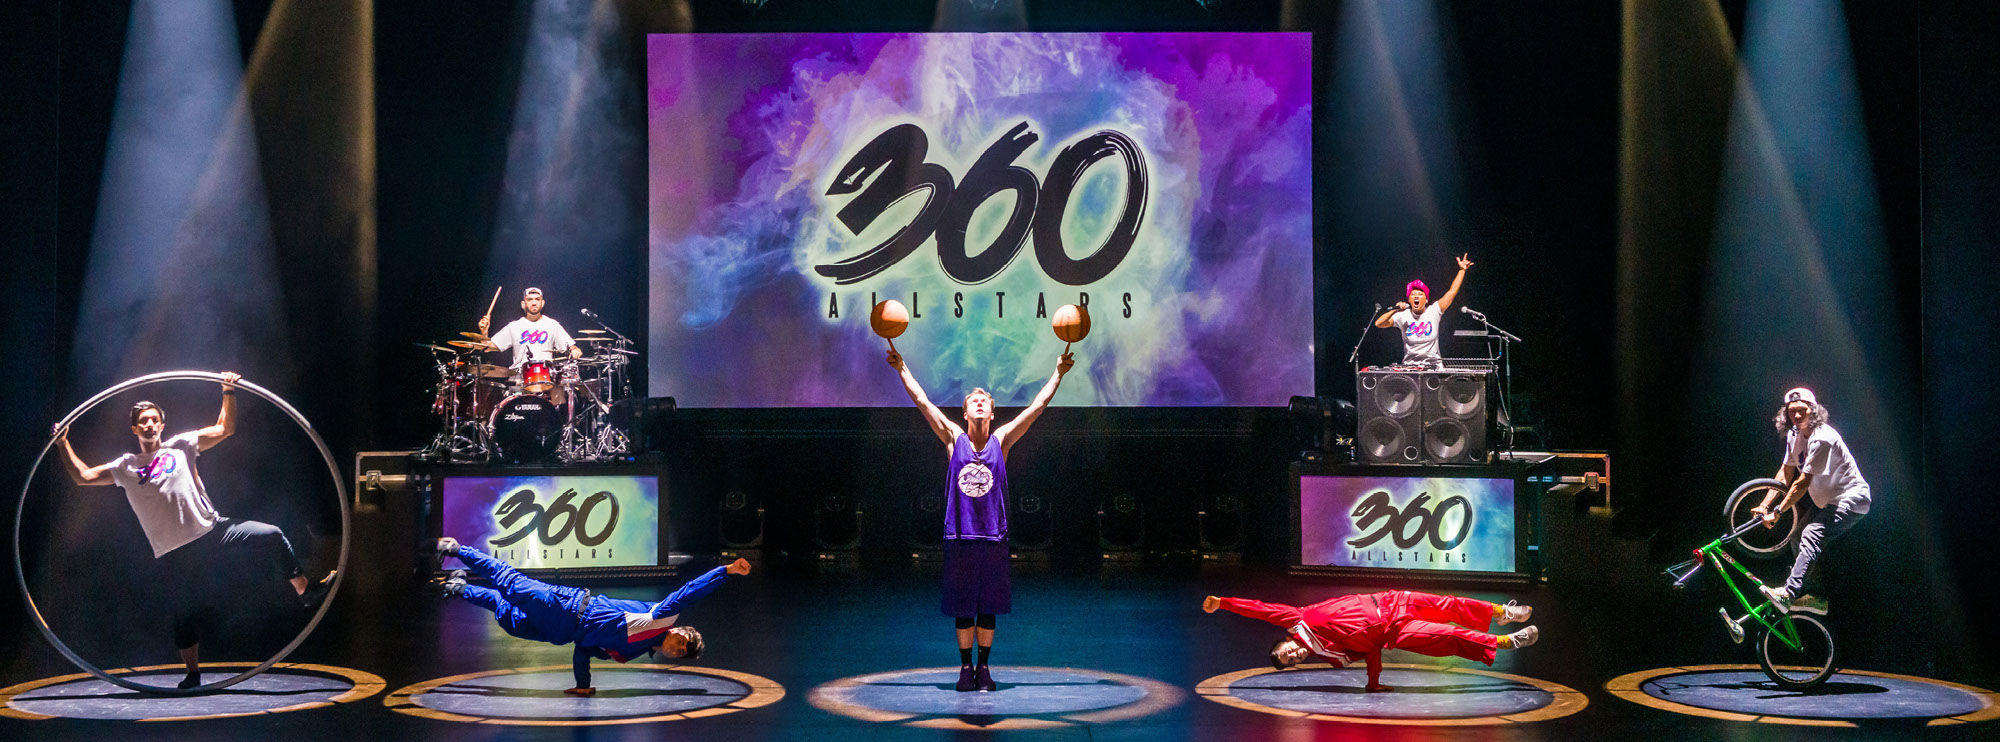 Image of the 360 All Stars perfoming with their logo projected on a screen centre stage. To the left, a man plays the drums atop a platform that reads "360 All Stars" in green, purple and blue. He wears a white shirt with a backwards baseball cap. Standing opposite him on another platform, a woman plays music from a sound system with two large speakers. She speaks into the microphone, and raises her left arm in the air. To the left, a man wearing blue ensemble balances his body on one arm, which is propelled sideways in the air. The man opposite him performs the same stunt, but wears a red suit. In the centre of the image, a man in a purple tank top spins two basketballs on his index fingers. The performs are all illuminated on stage by a colourful spotlight.